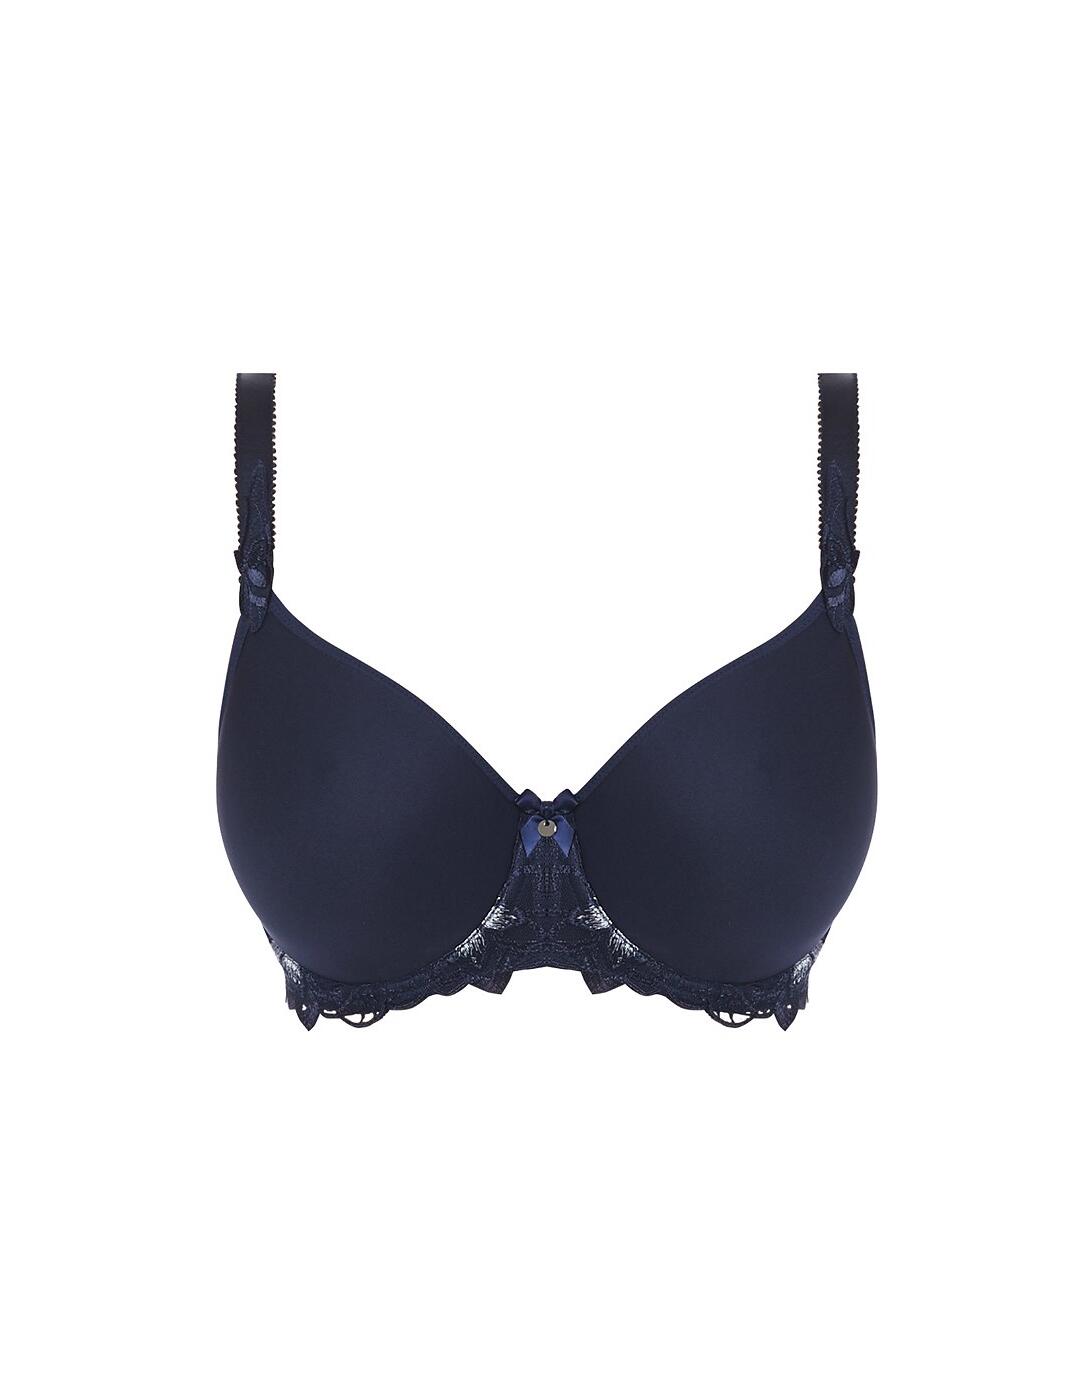 Fantasie Leona Bra Spacer Full Cup 2681 Underwired Lingerie Womens ...